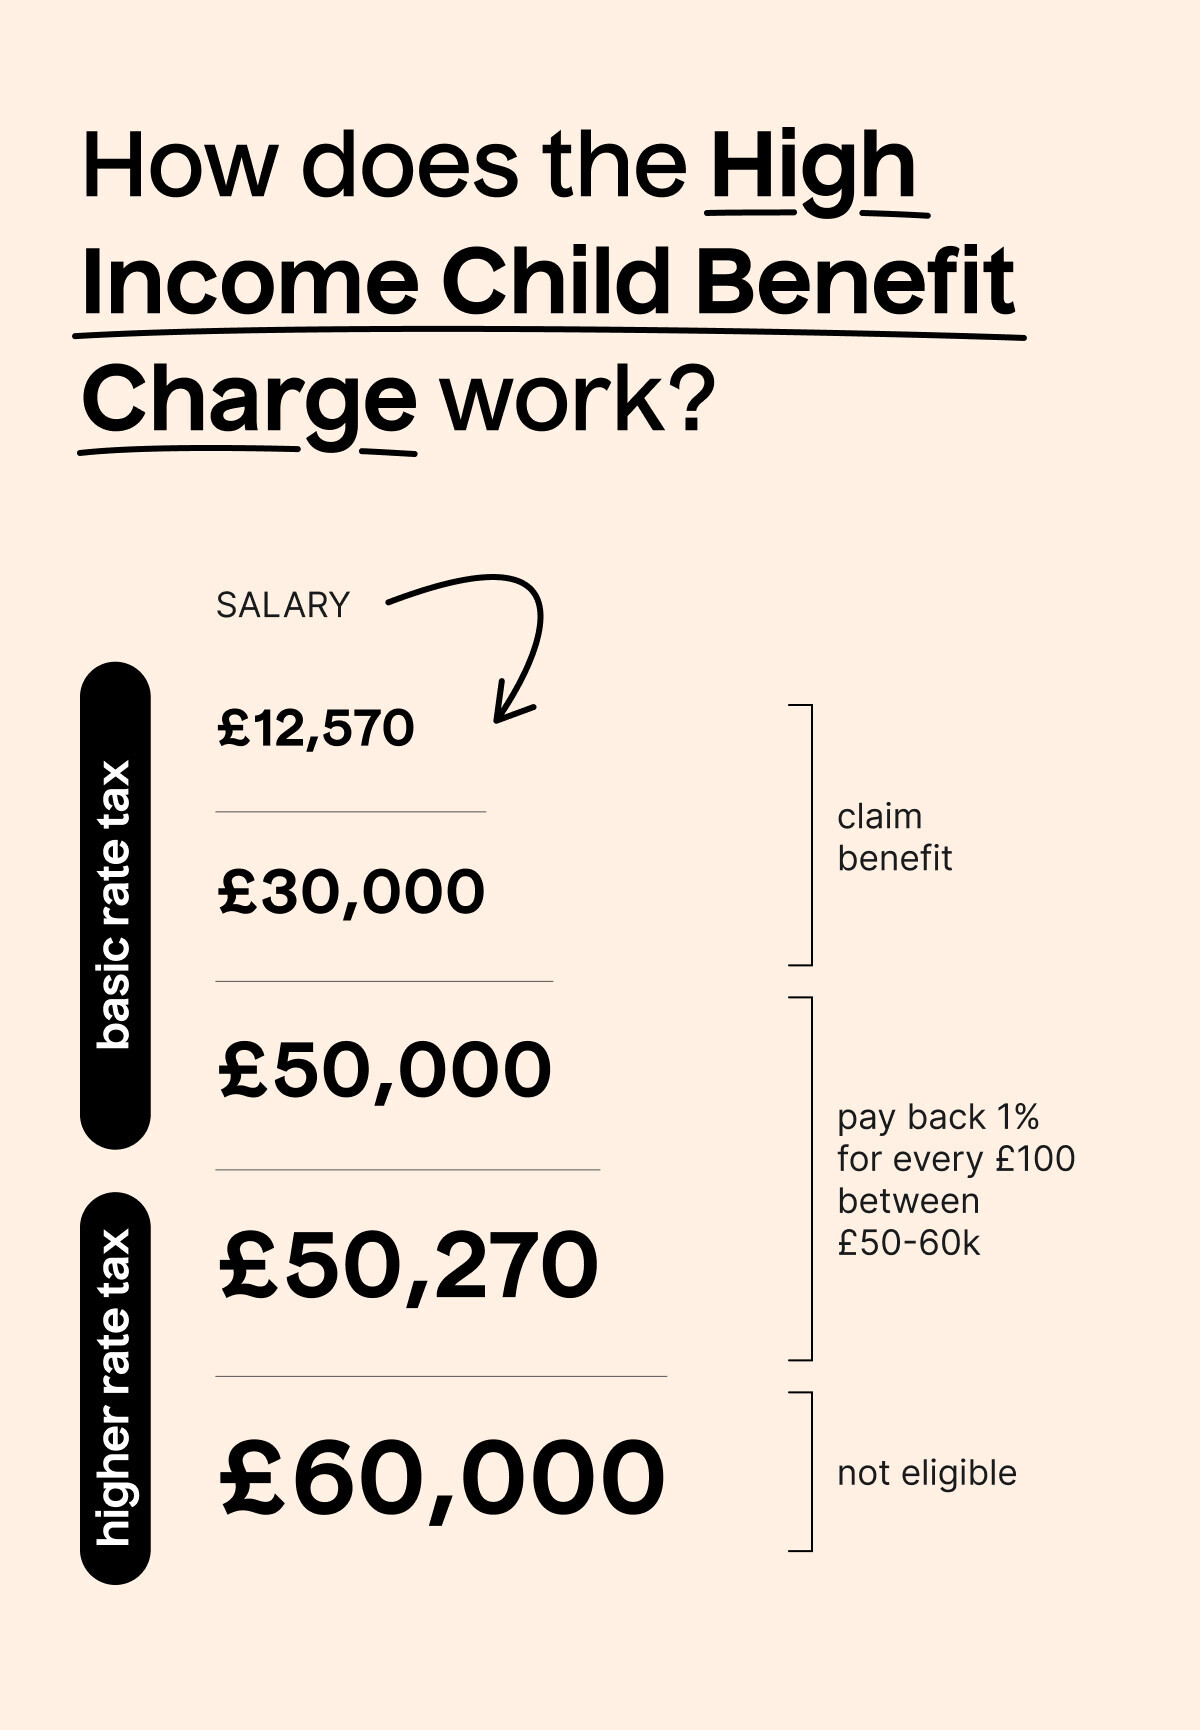 How does the High Income Child Benefit Charge work?